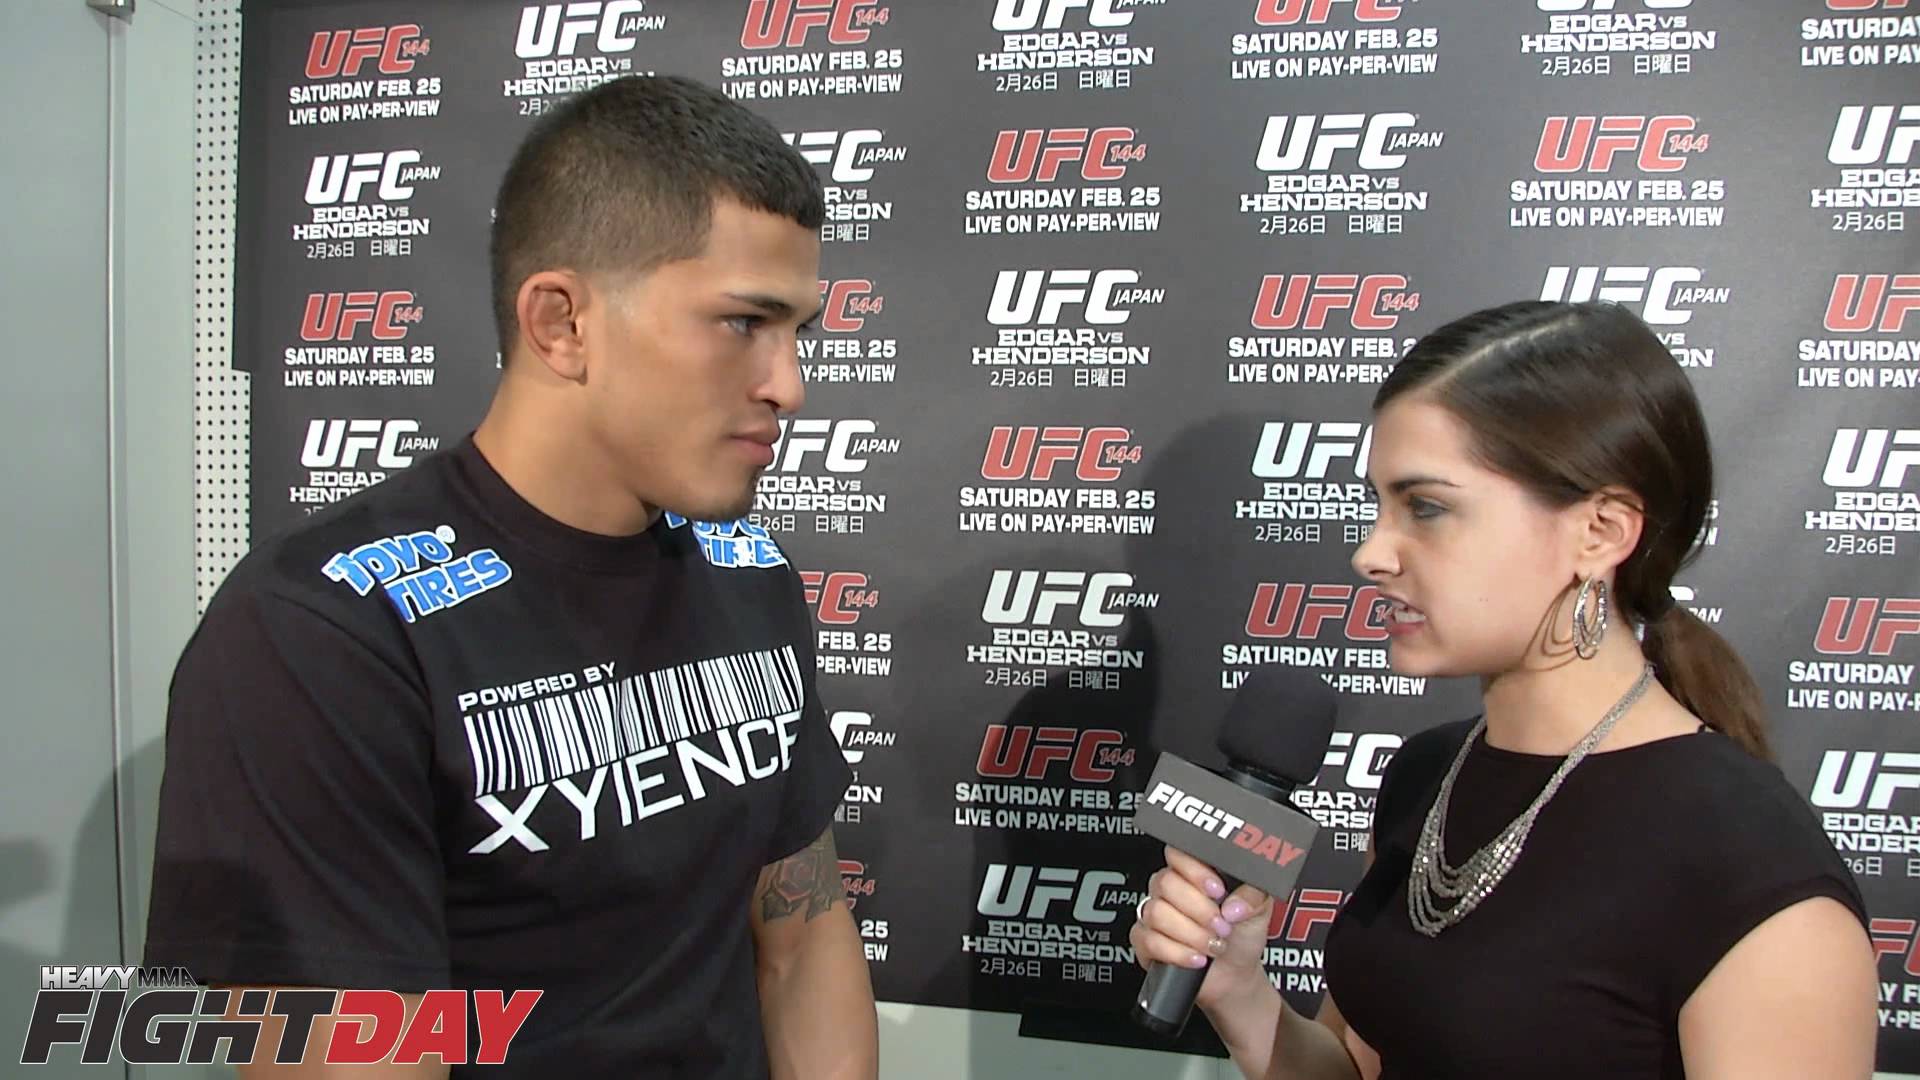 Anthony Pettis UFC 144 Post-Fight Interview MMA Video